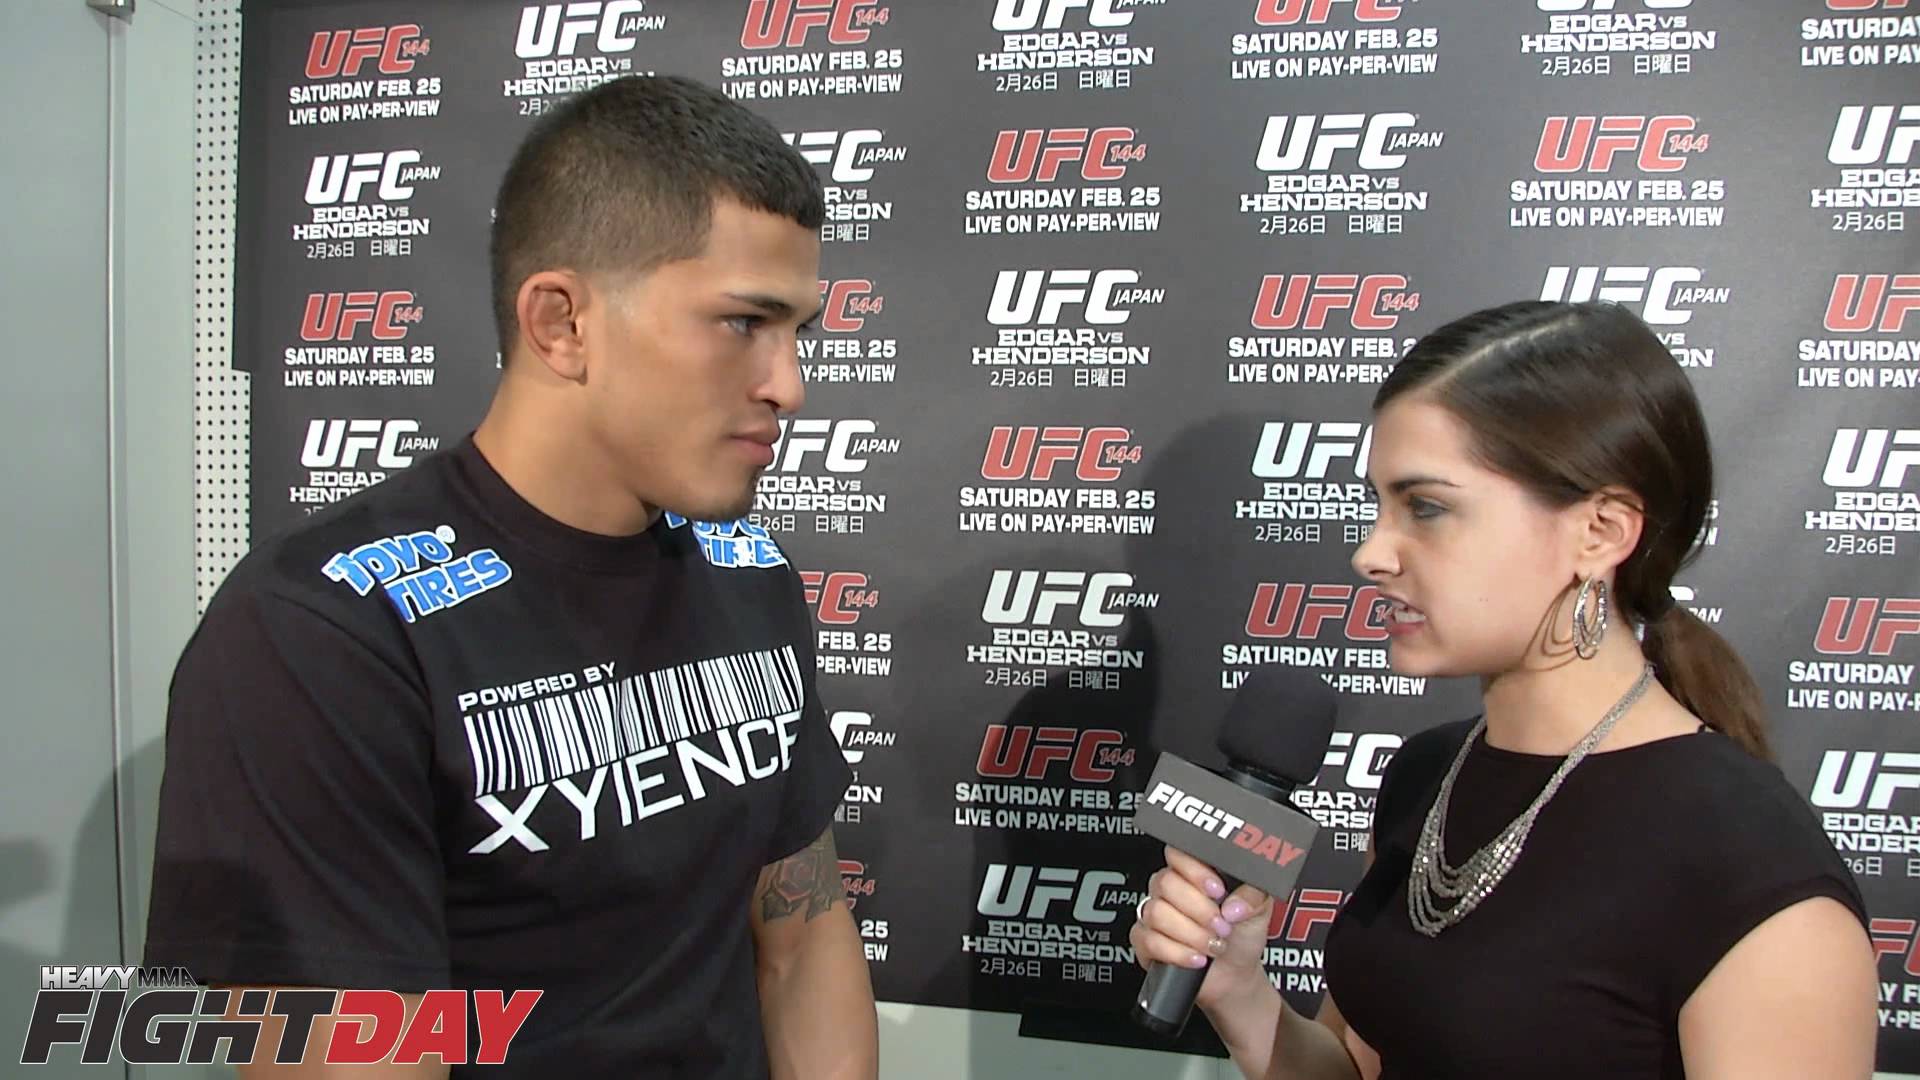 Anthony Pettis UFC 144 Post-Fight Interview MMA Video